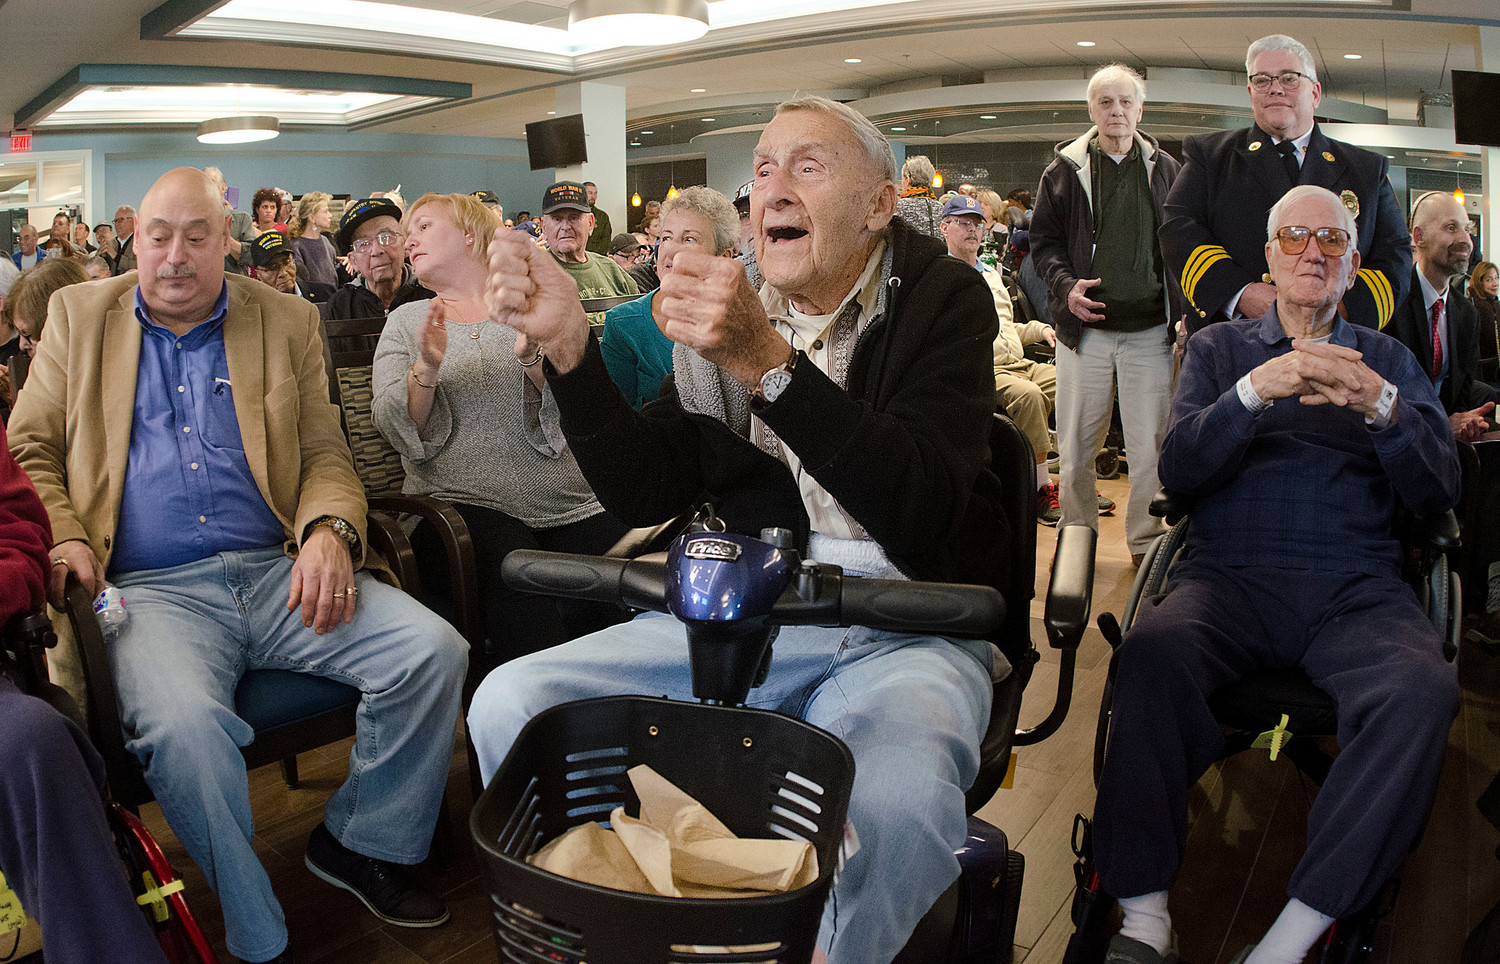 WWII veteran Richard Fisher dances in his wheelchair as the Mt. Hope High School band plays the Armed Forces medley during the Veteran’s Day ceremony.